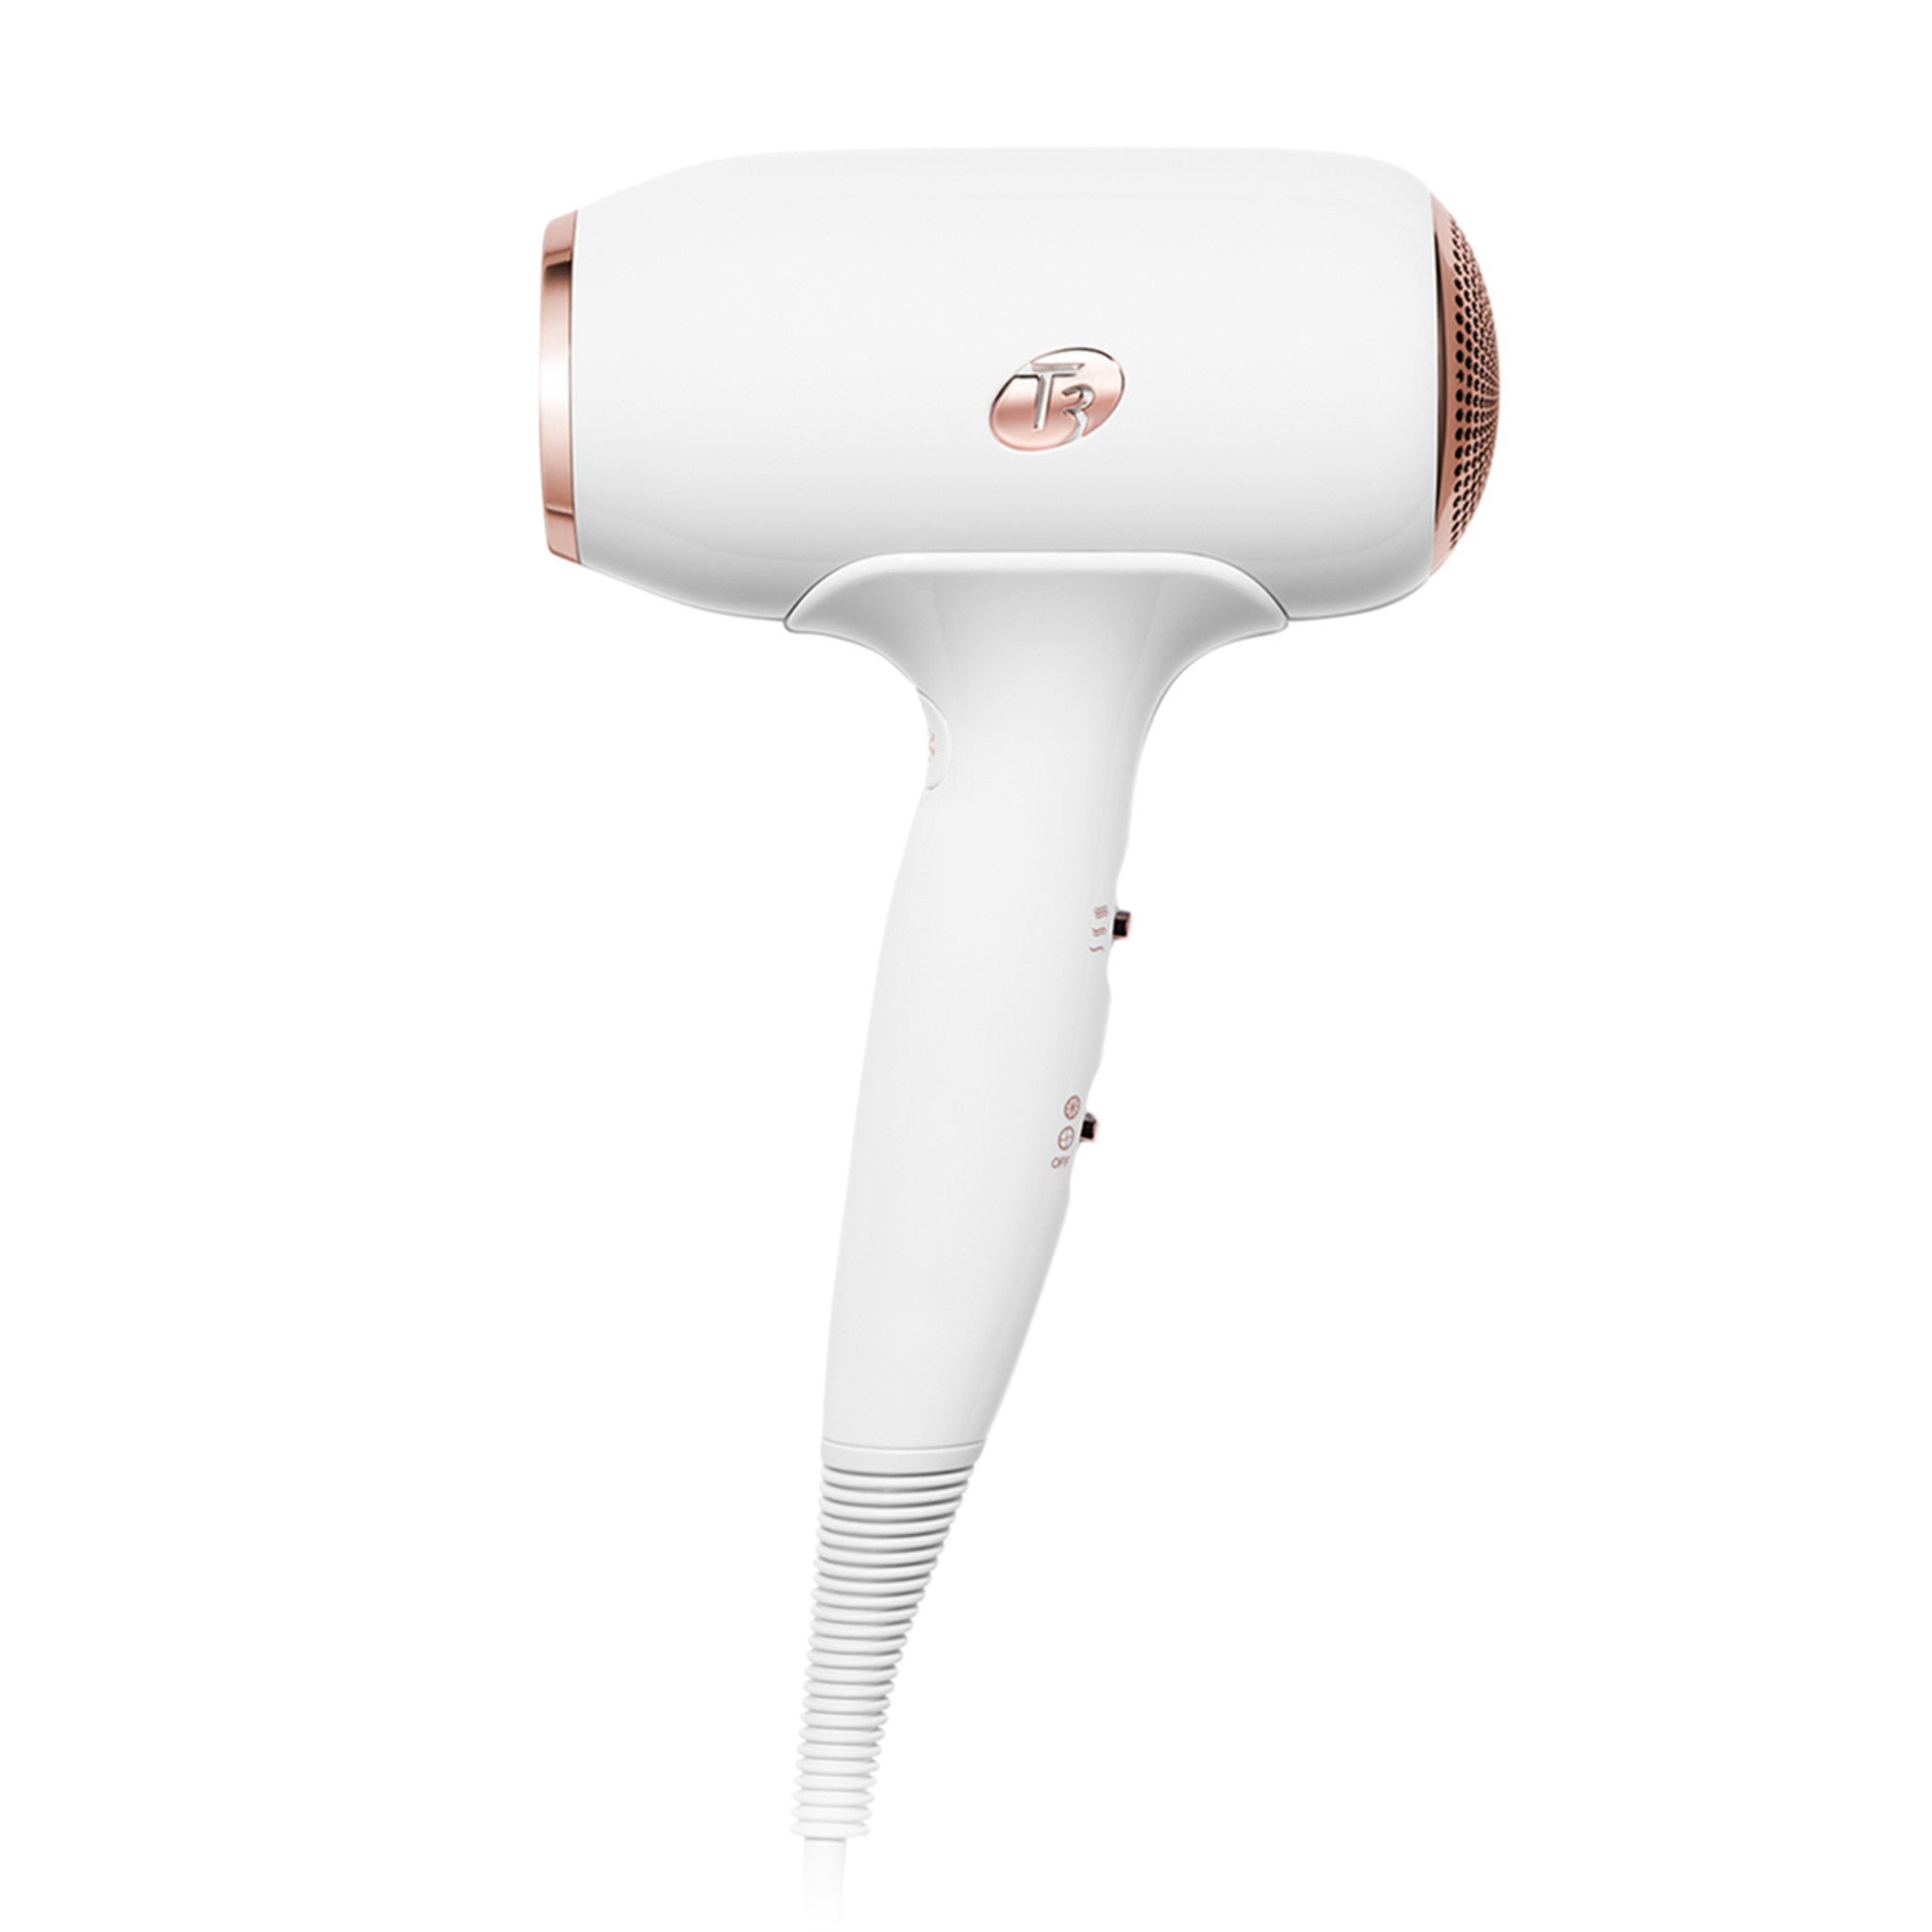 T3 Fit Compact Hair Dryer main image.